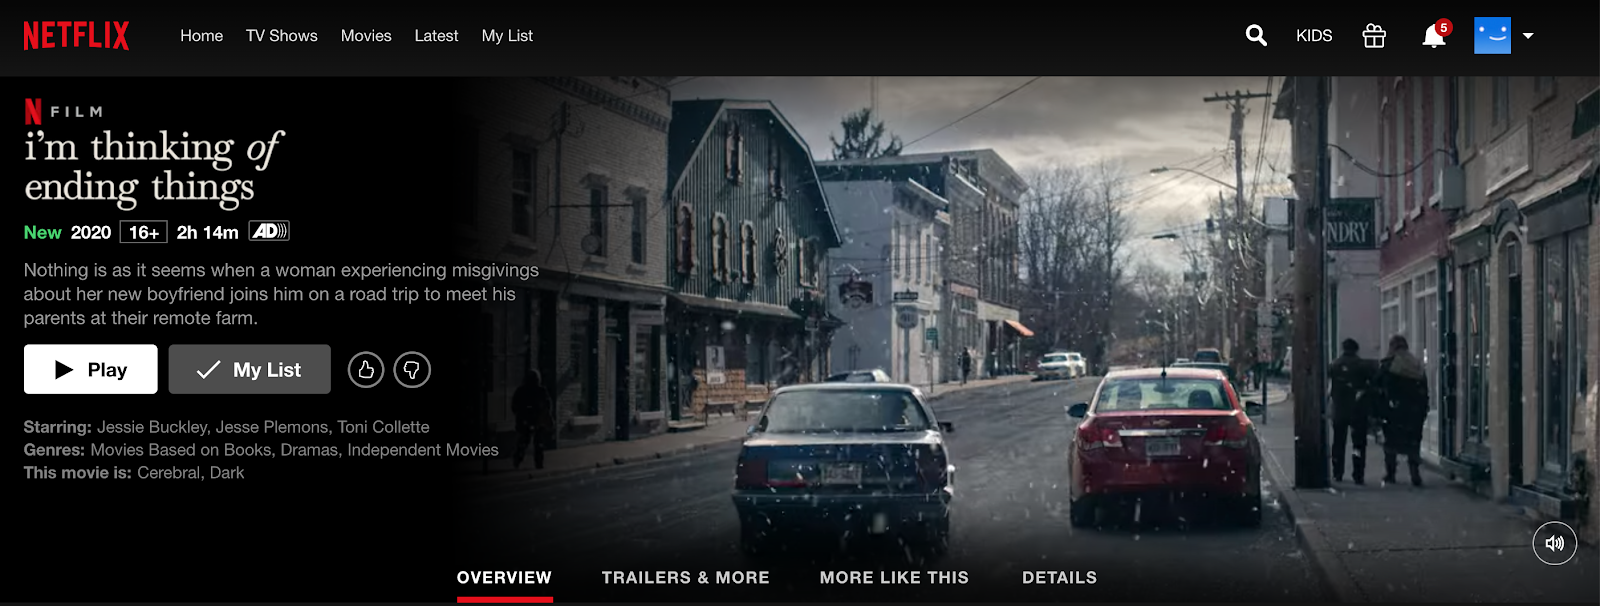 Netflix as an alternative to watch YouTube movies